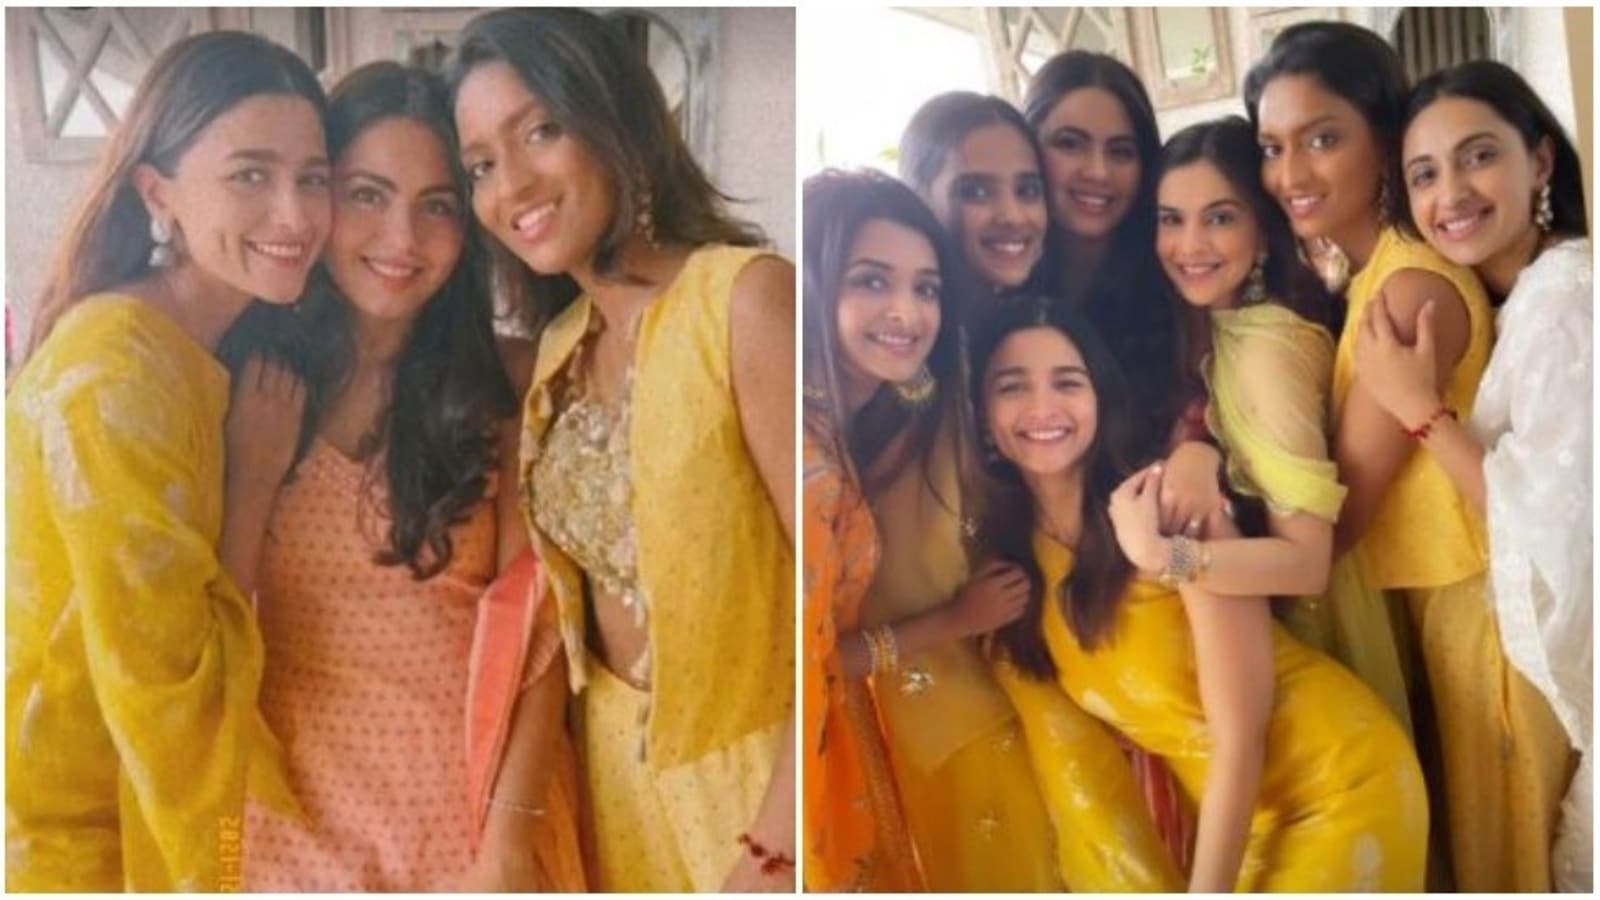 Alia Bhatt Is All Smiles At Friends Haldi Ceremony Poses With Bride To Be And Calls Her ‘sweet